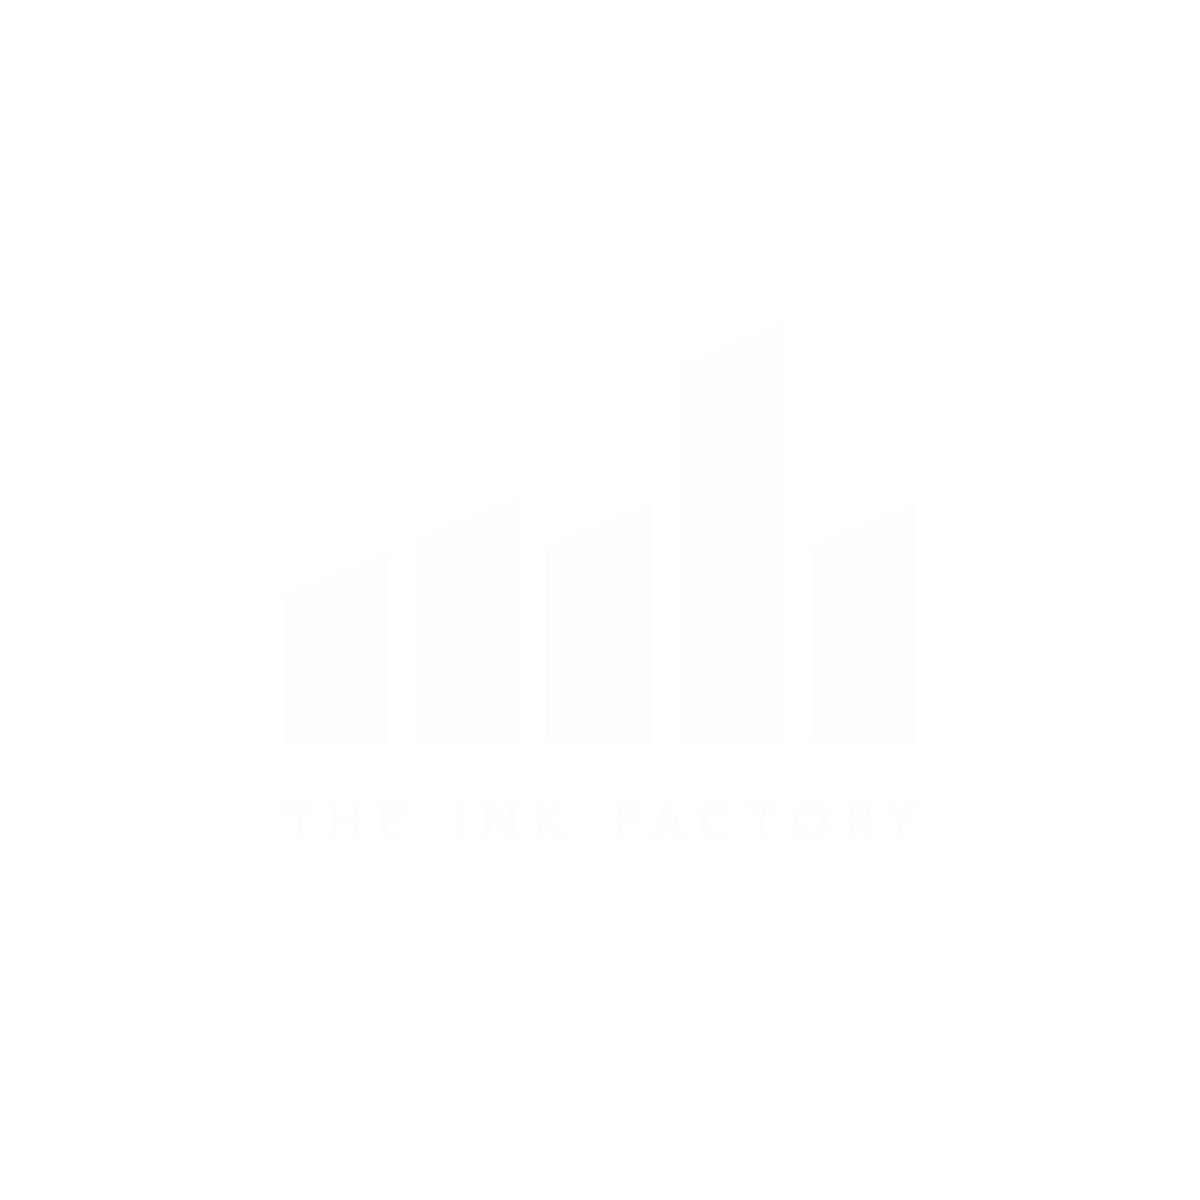 Inkfactory hover